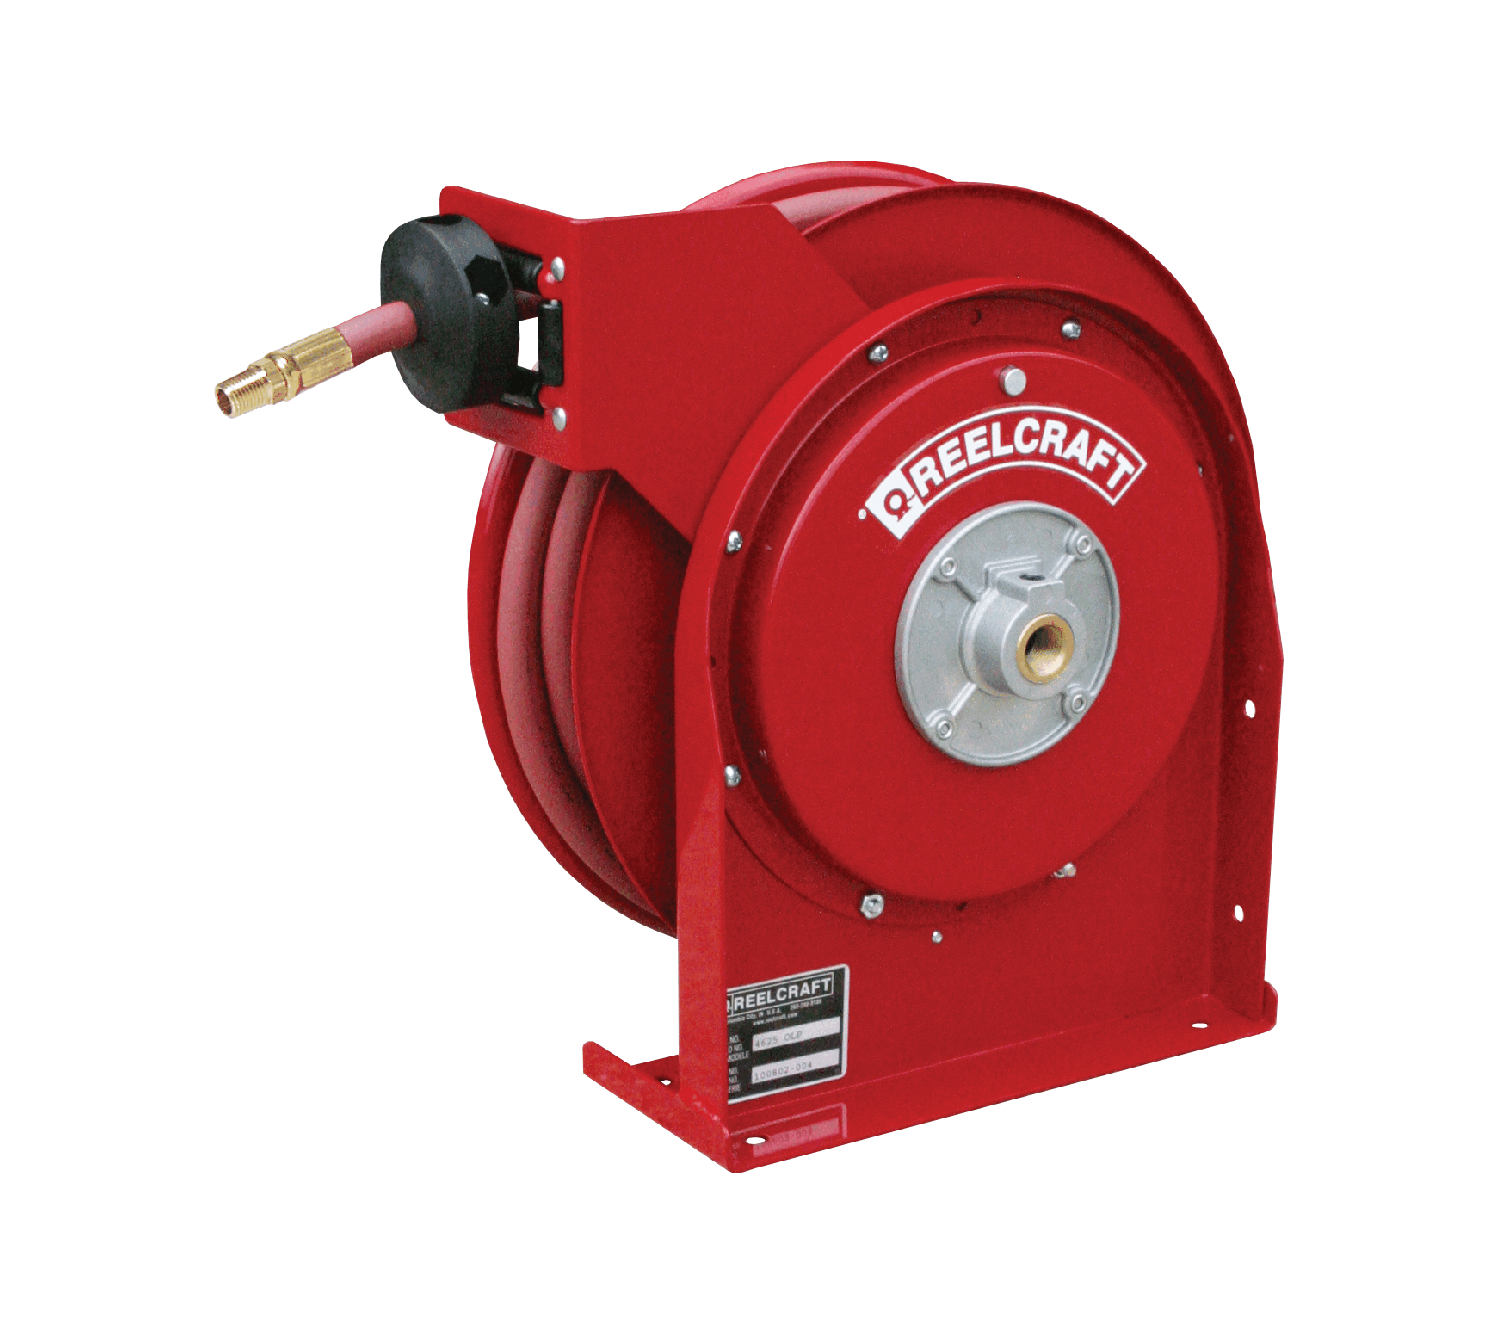 Reelcraft Hose and Cable Reels